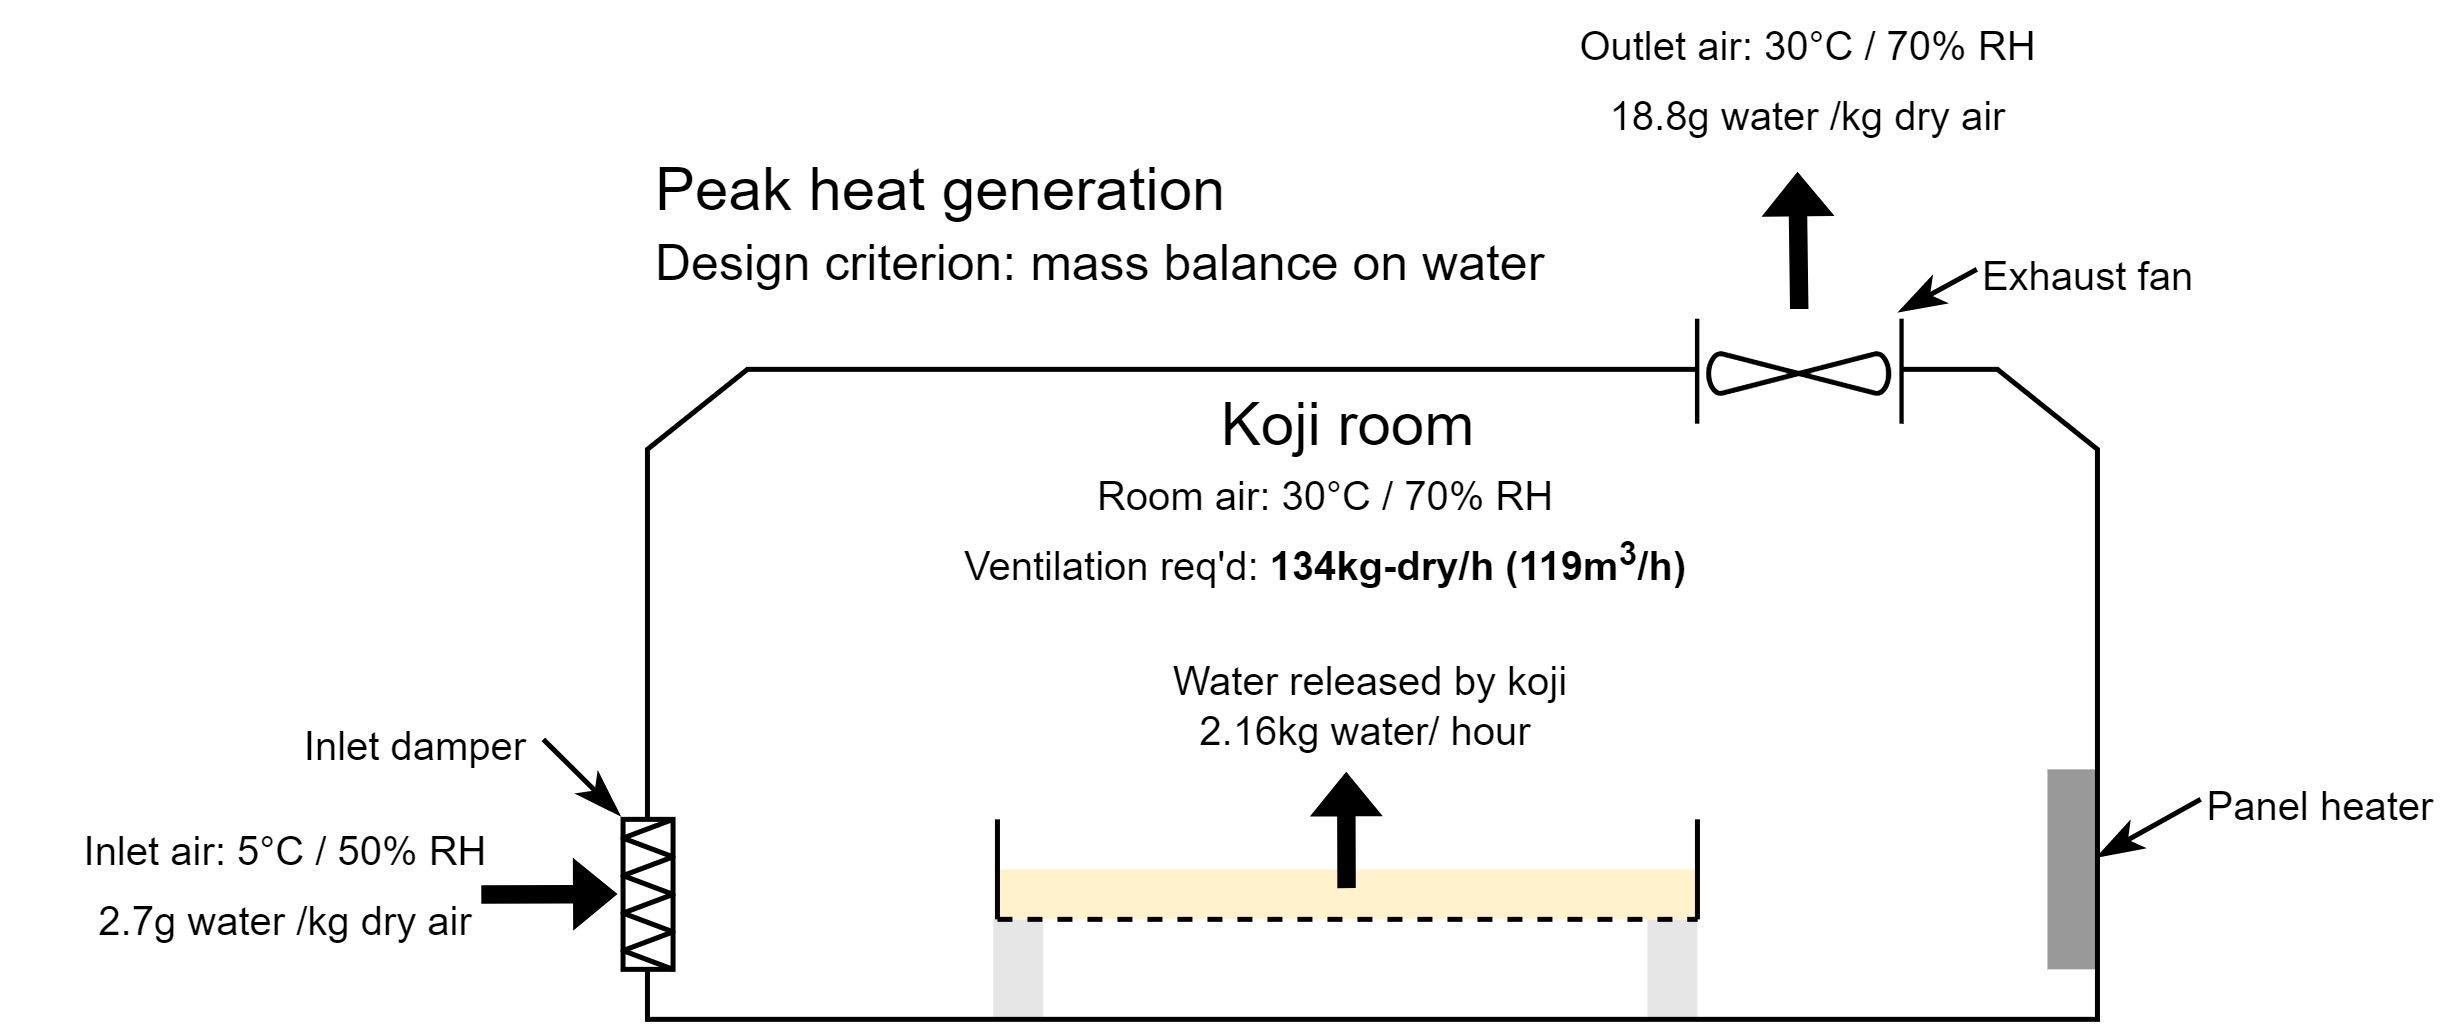 Mass balance of the koji room with ventilation sized for moisture removal